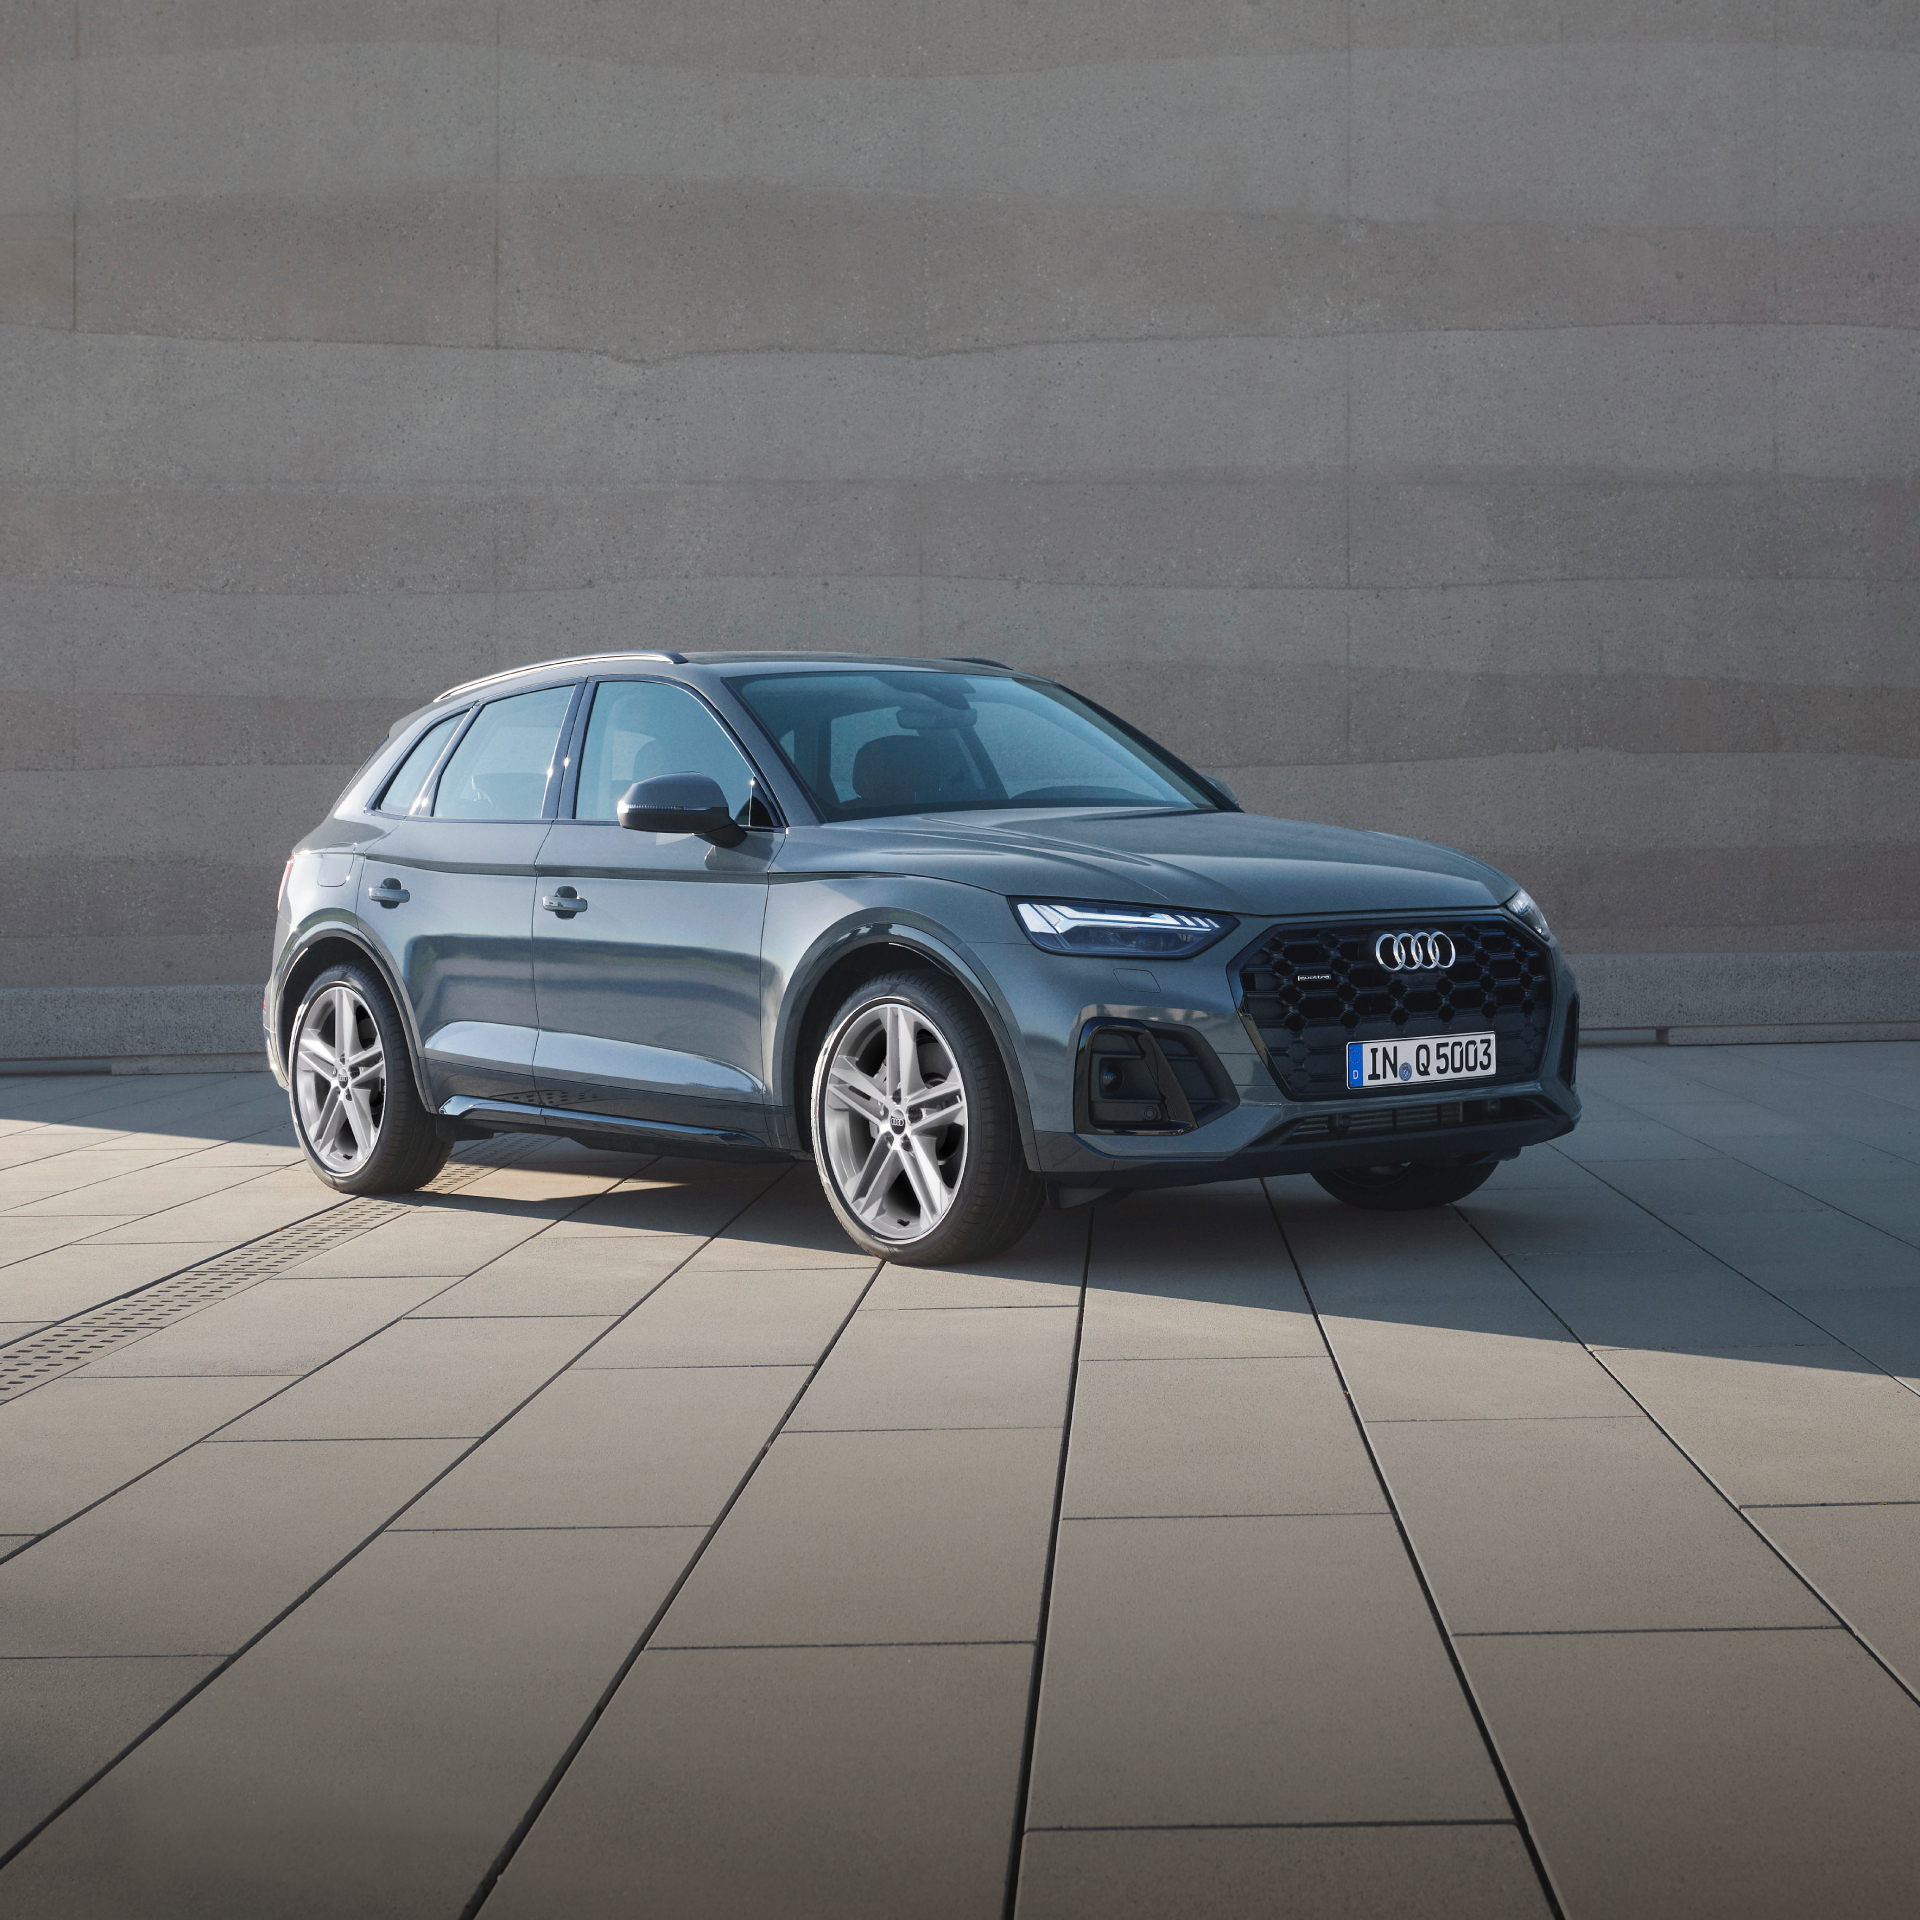 Experience the Audi Q5 Augumented Reality